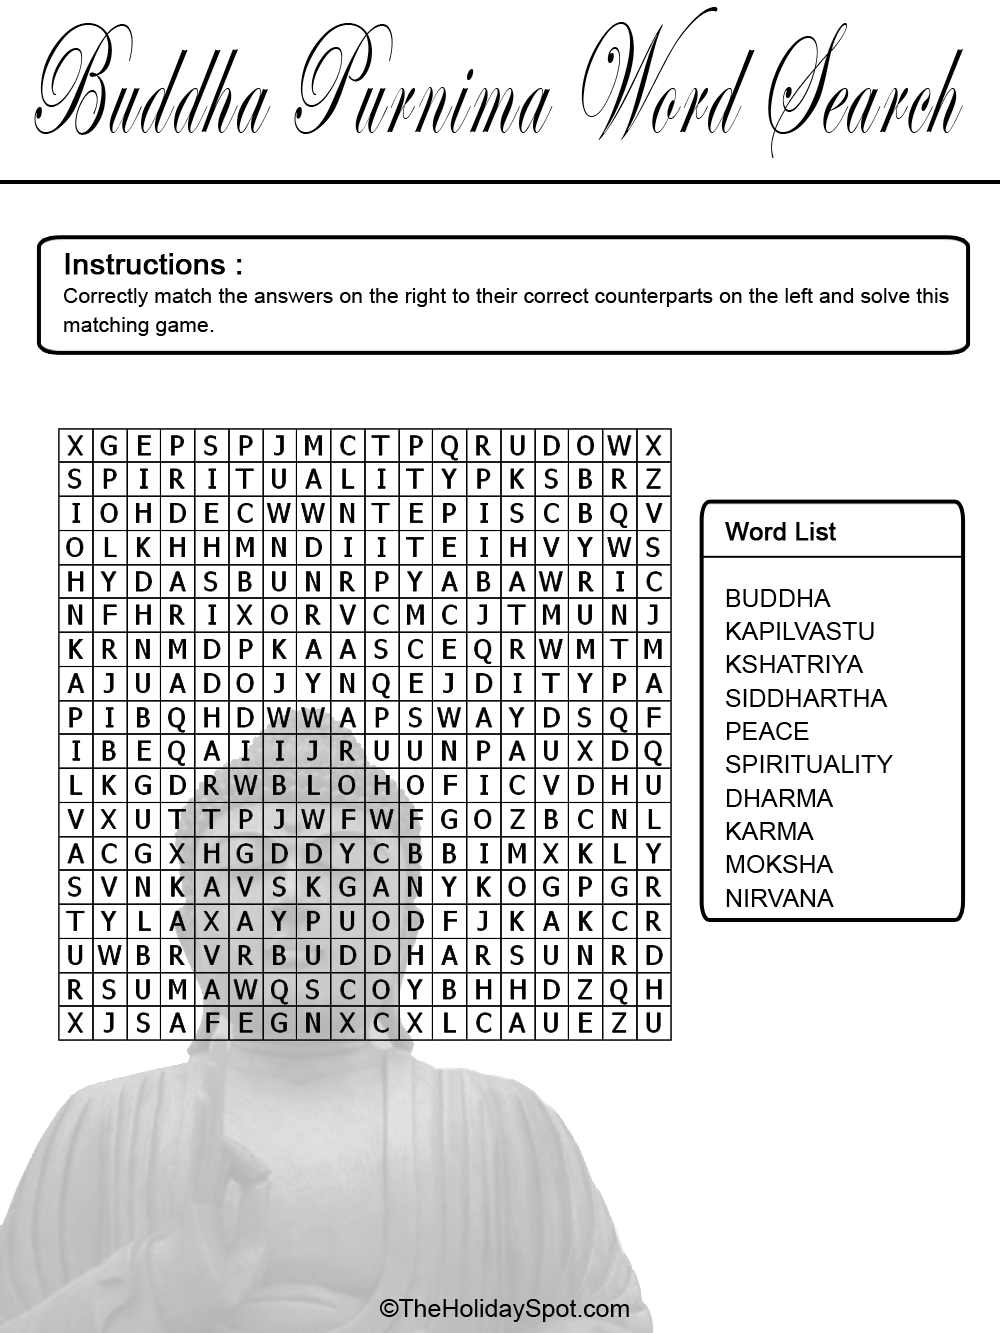 Black and White Word Search Puzzle Template for Buddha Purnima